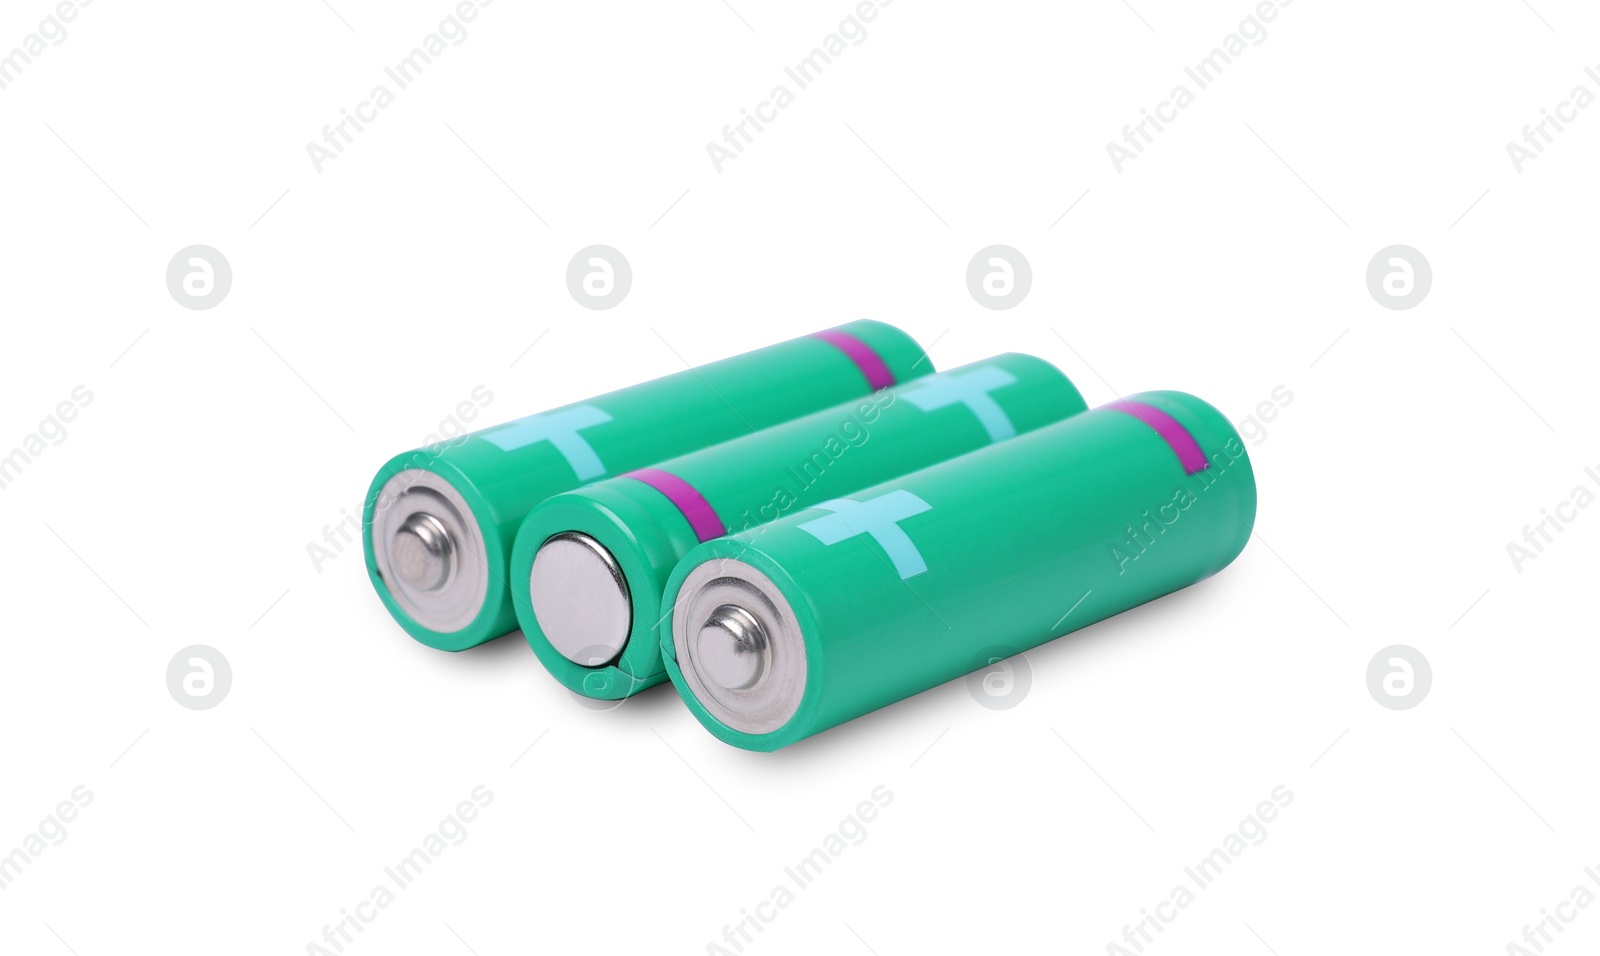 Photo of New AA size batteries isolated on white